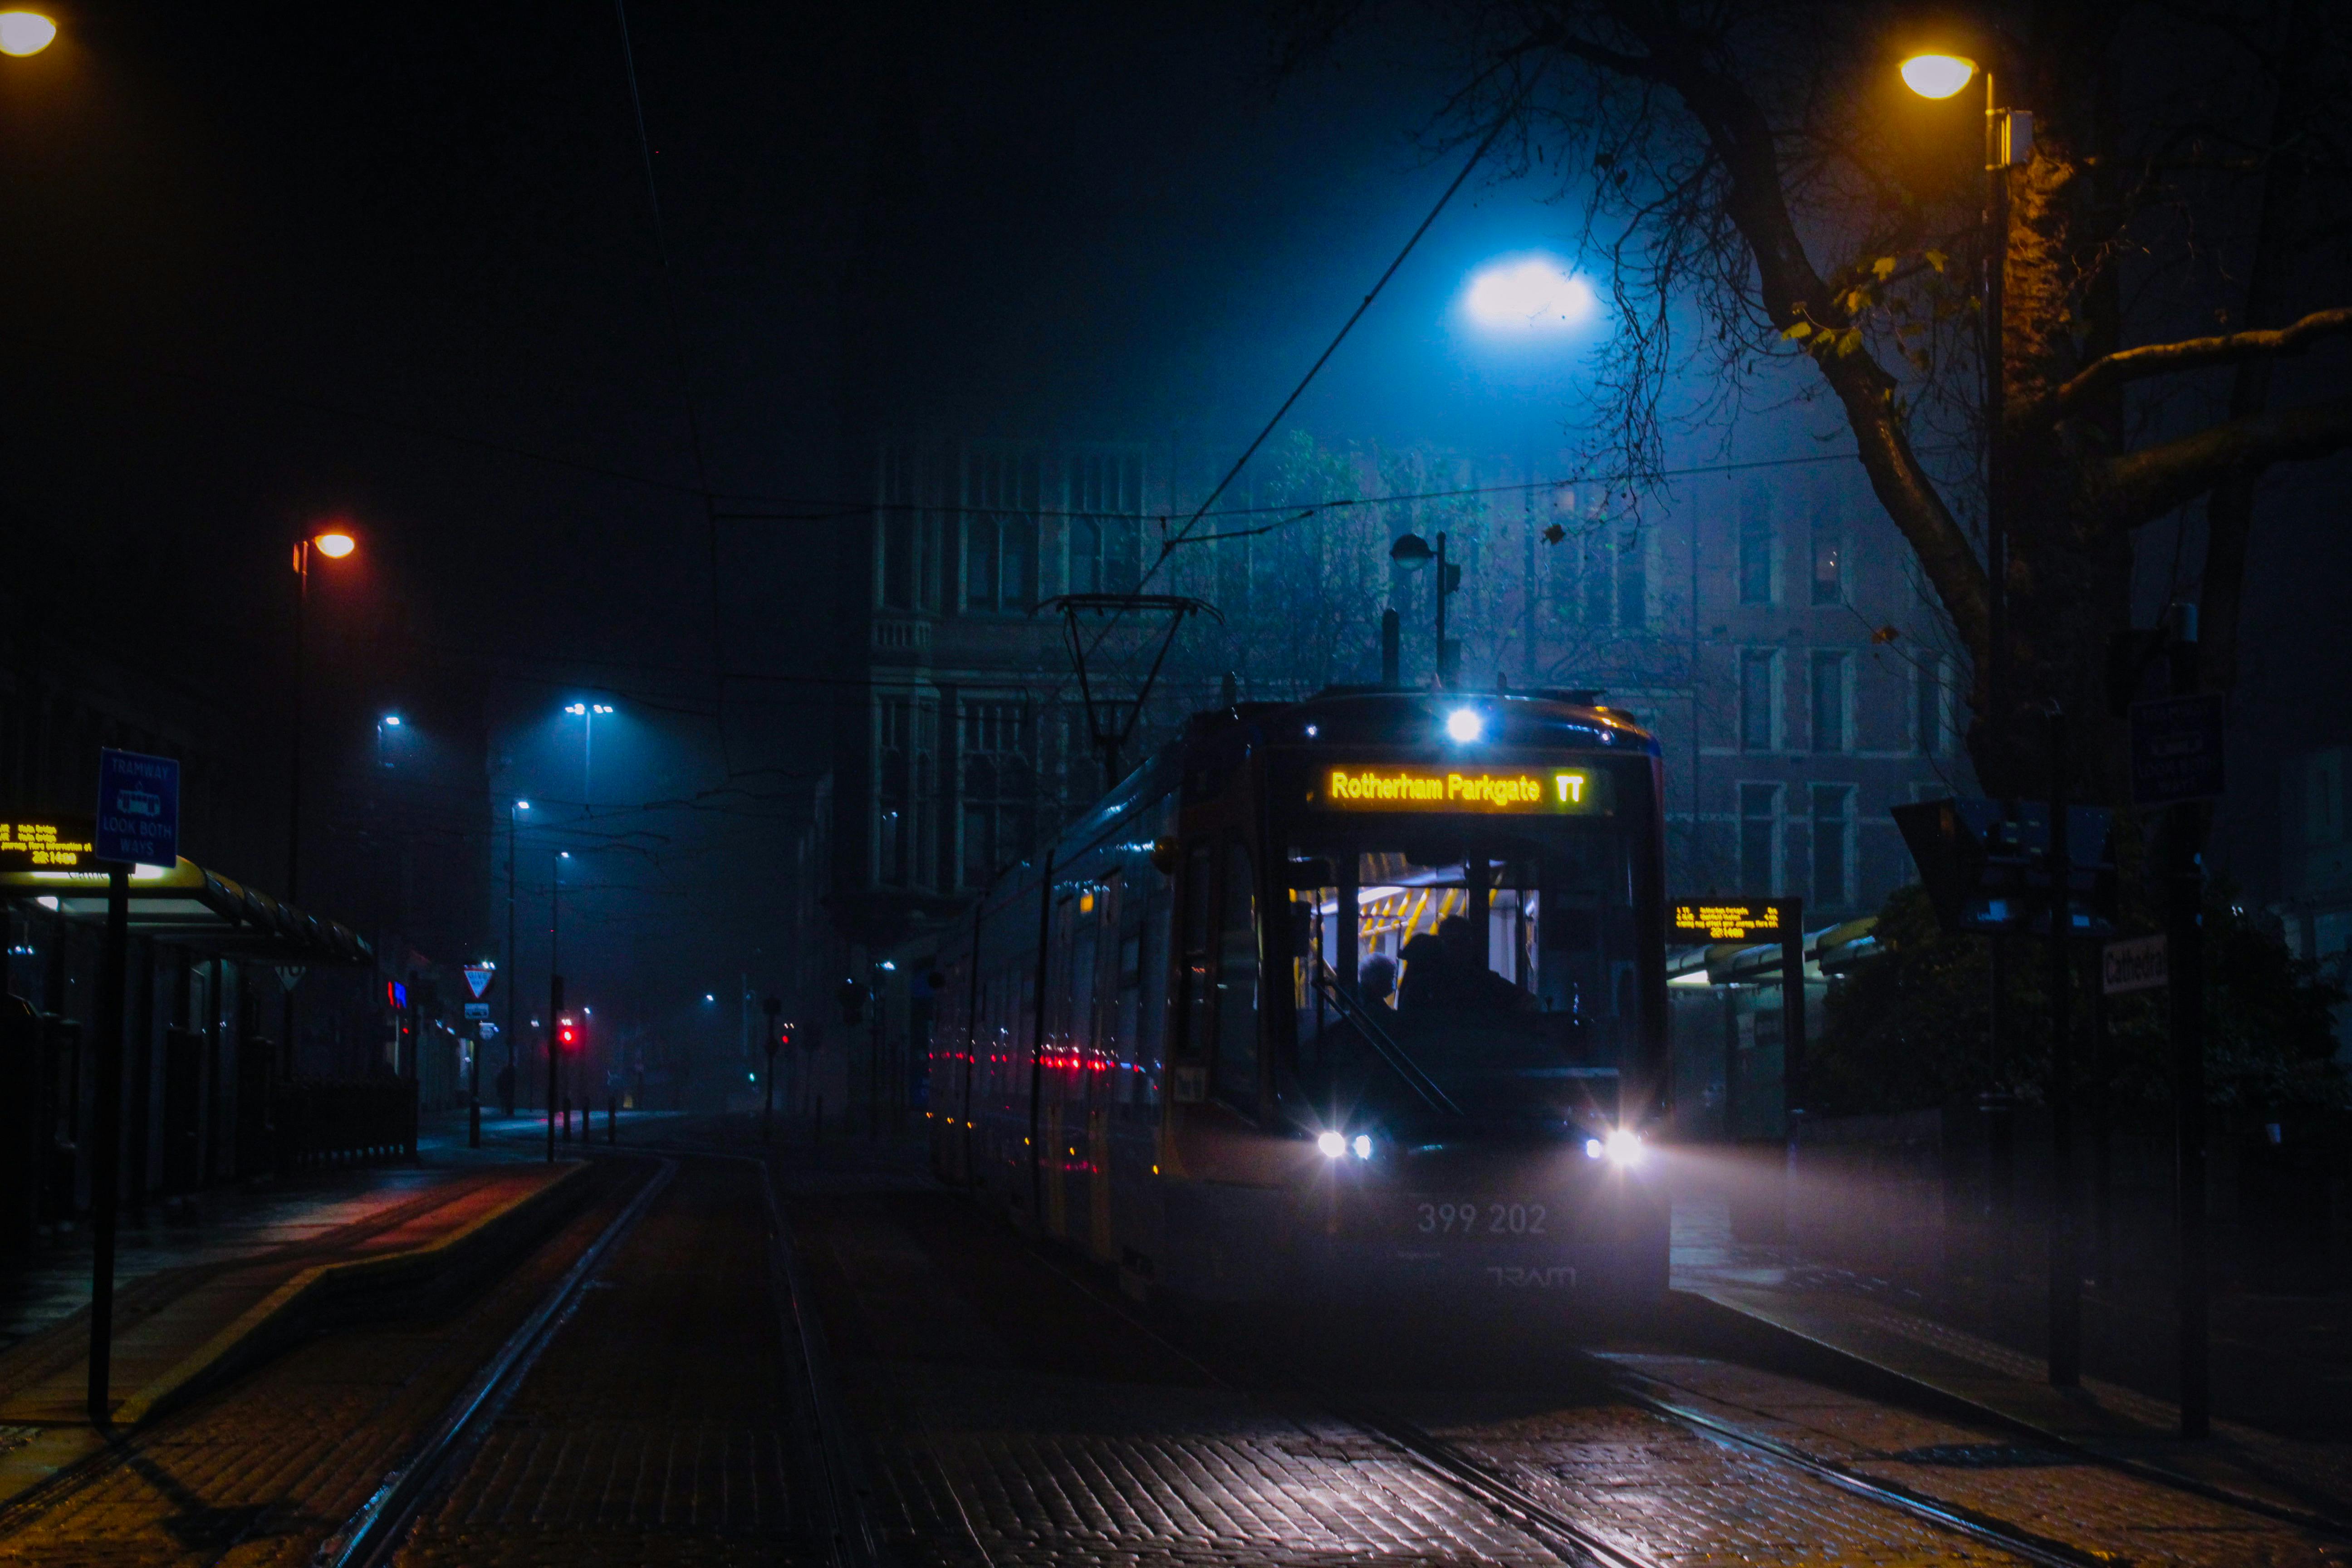 Red and White Tram On A Rainy Night · Free Stock Photo